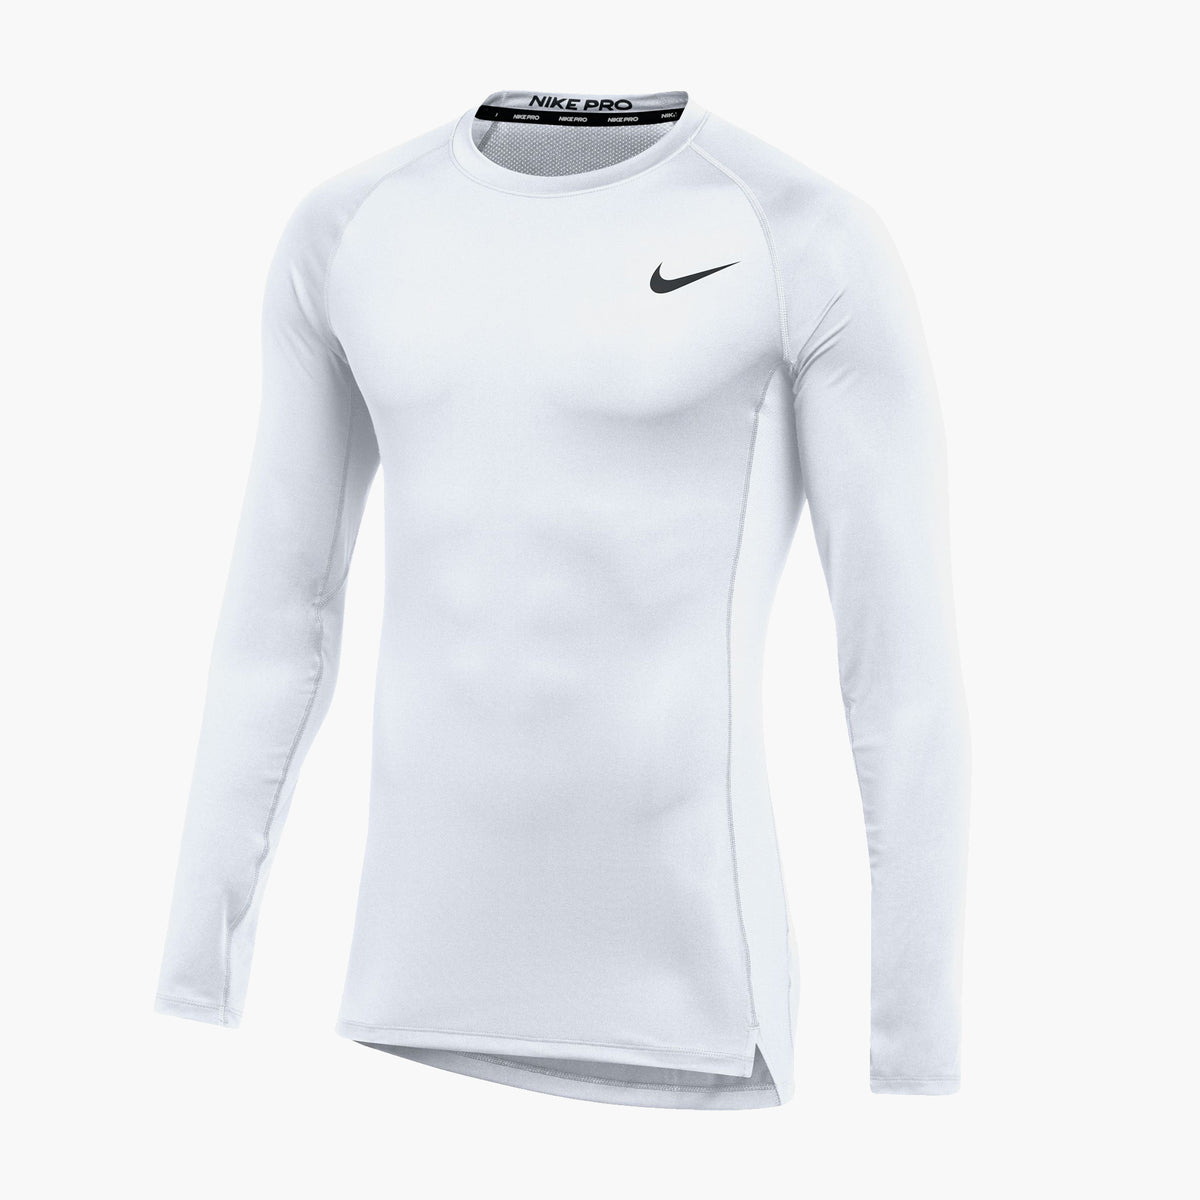 Nike Pro Tight Long Sleeve Base Layer Compression Shirt Men's - Niky's ...